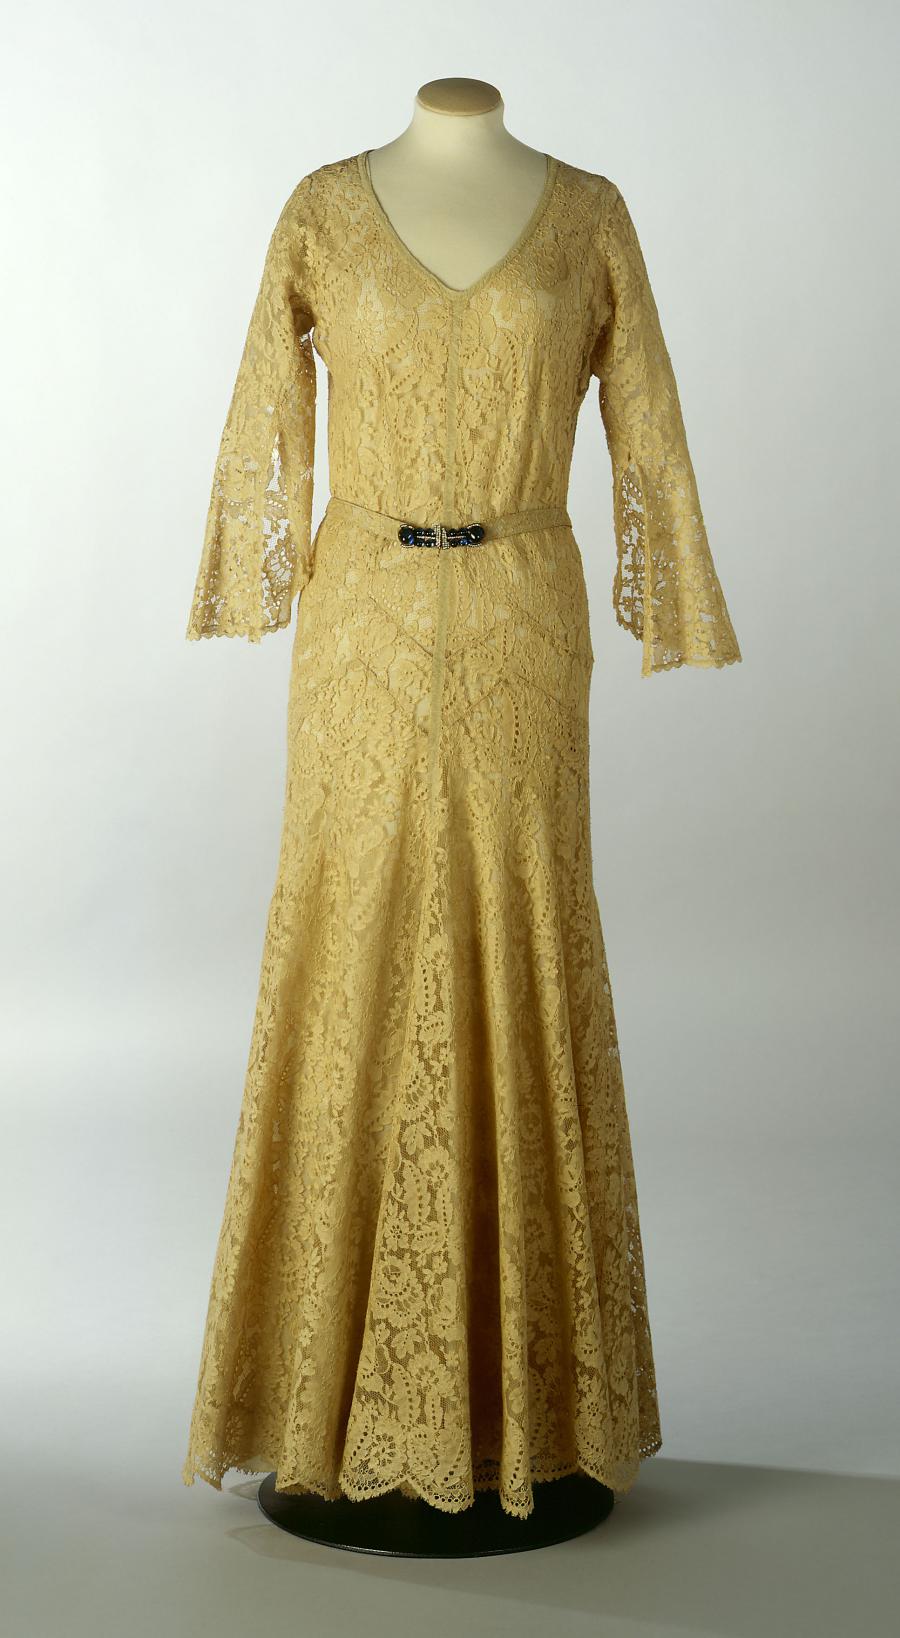 Evening gown, Chanel, Palais Galliera